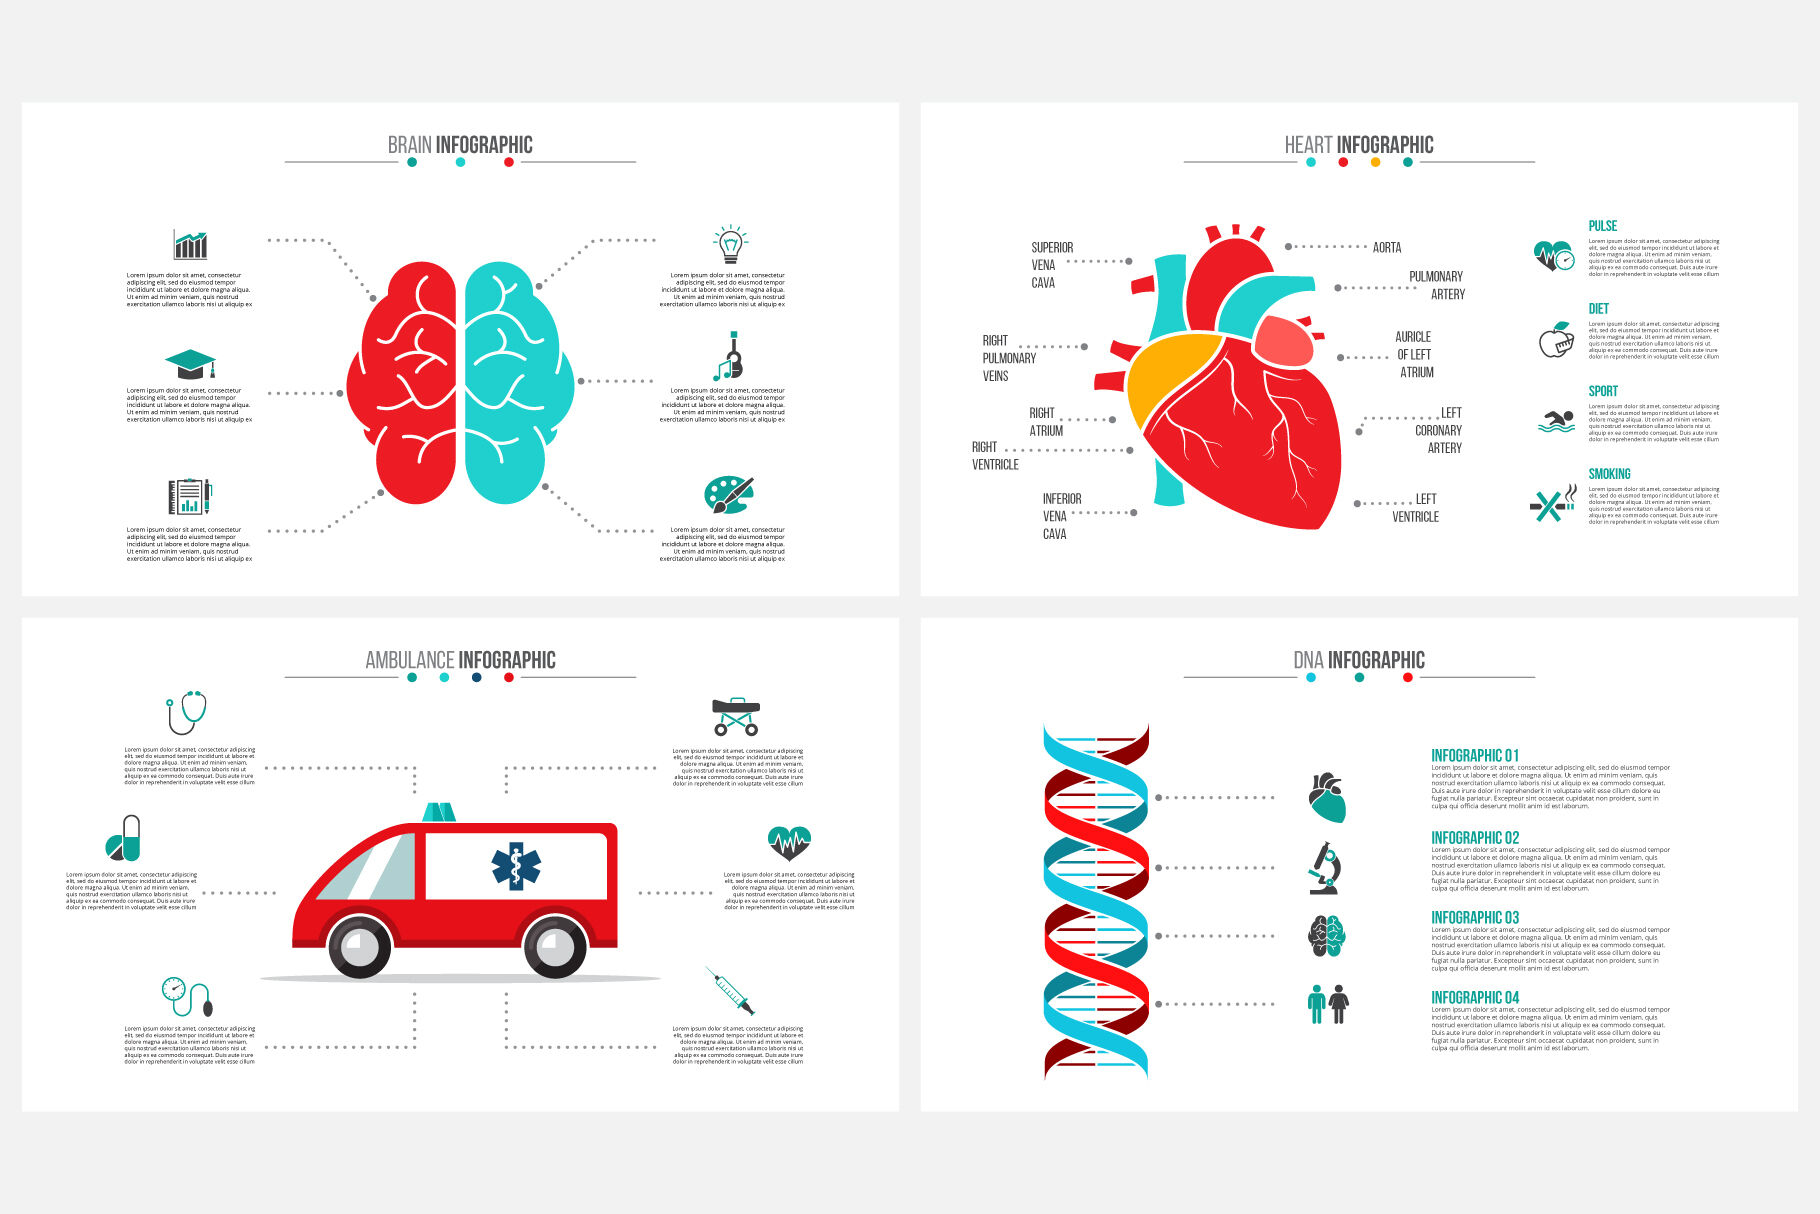 medical infographic animation